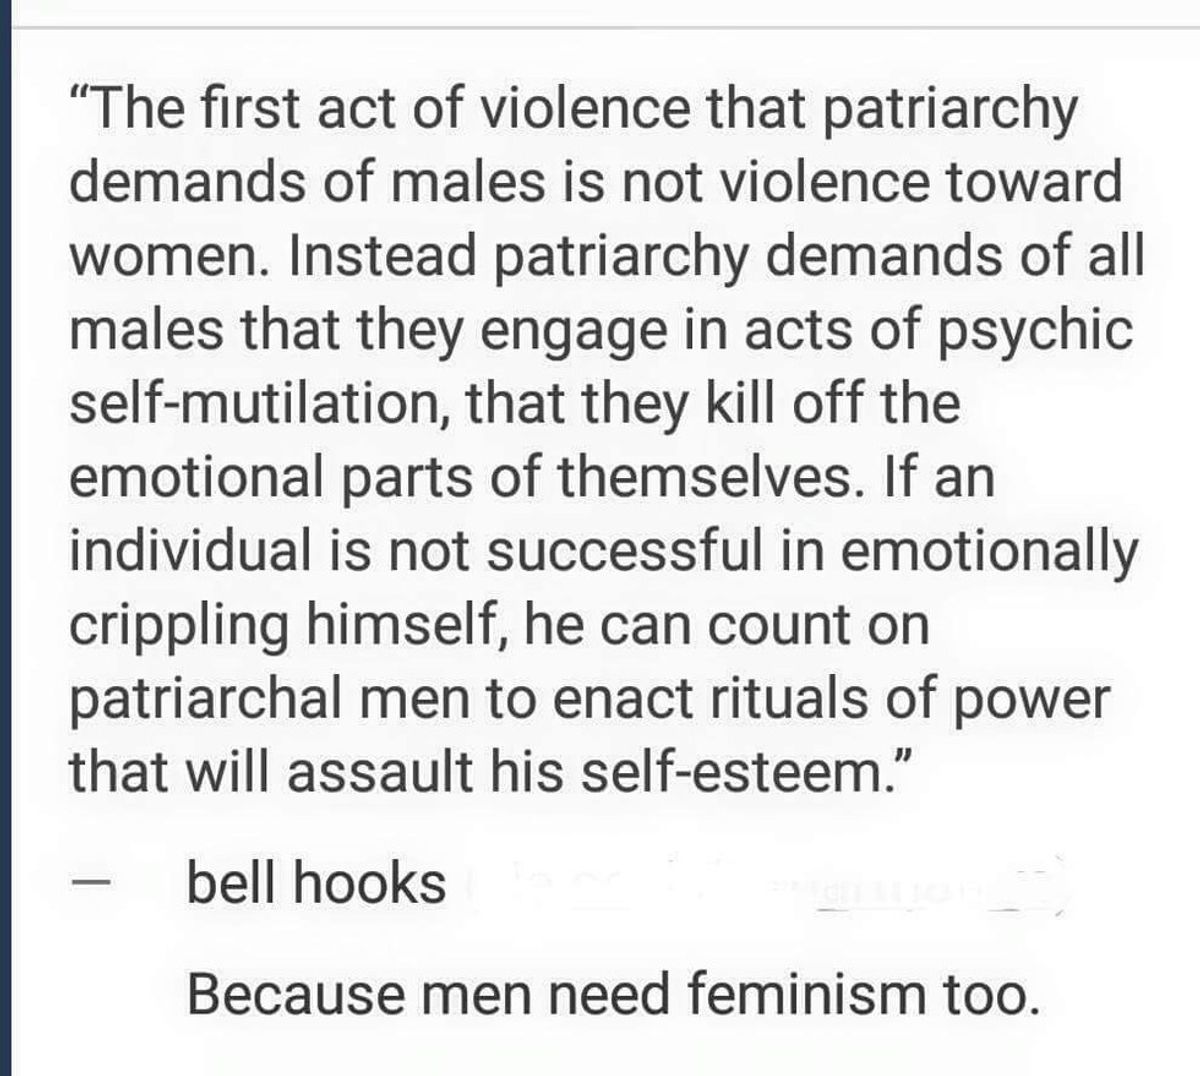 This Quote Perfectly Explains Why "Men Need Feminism, Too"